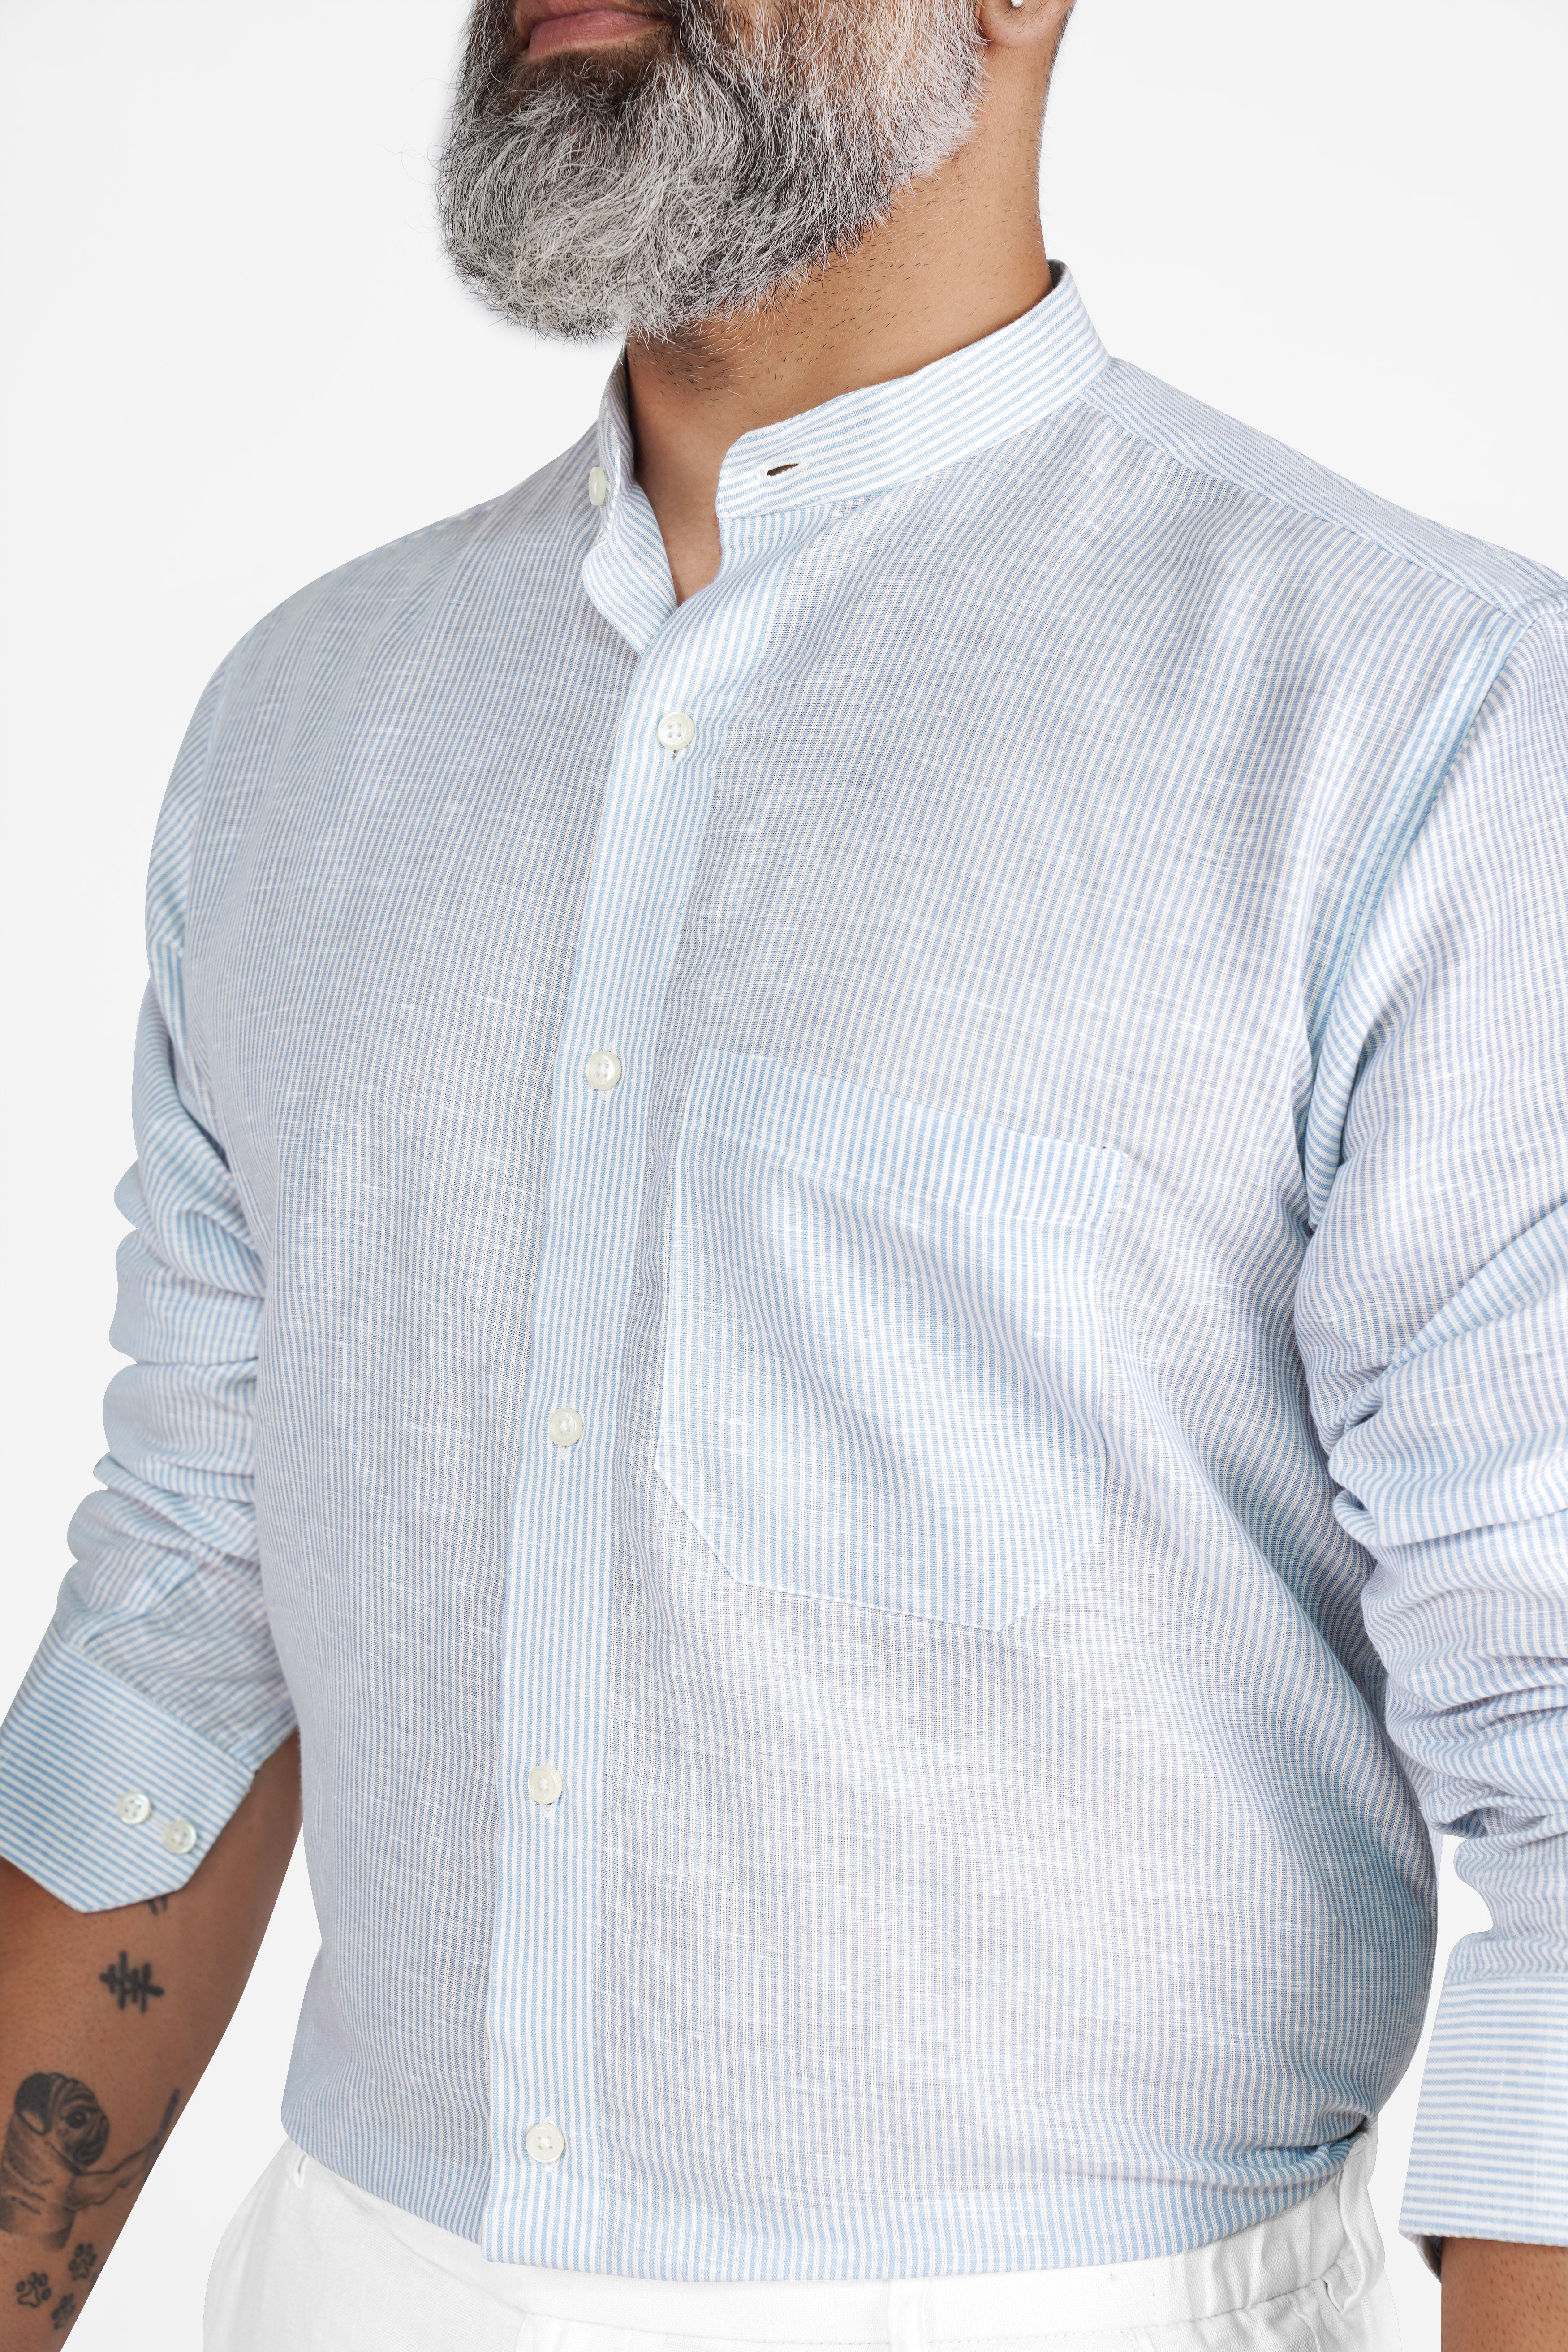 Periwinkle Blue and White Pinstriped Linen Shirt